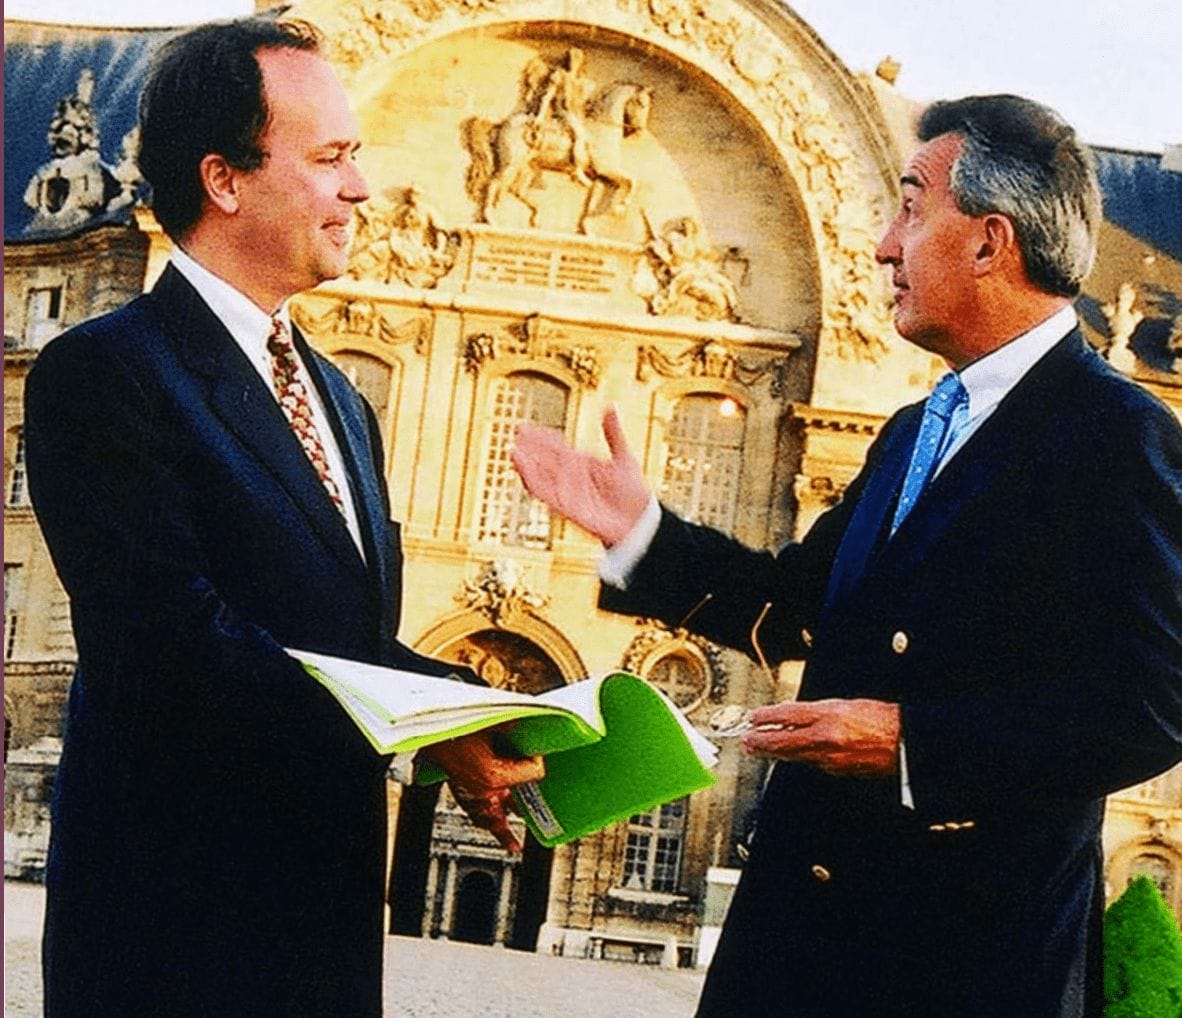 Two men in suits stand outside speaking to one another, one man holding a green notebook.